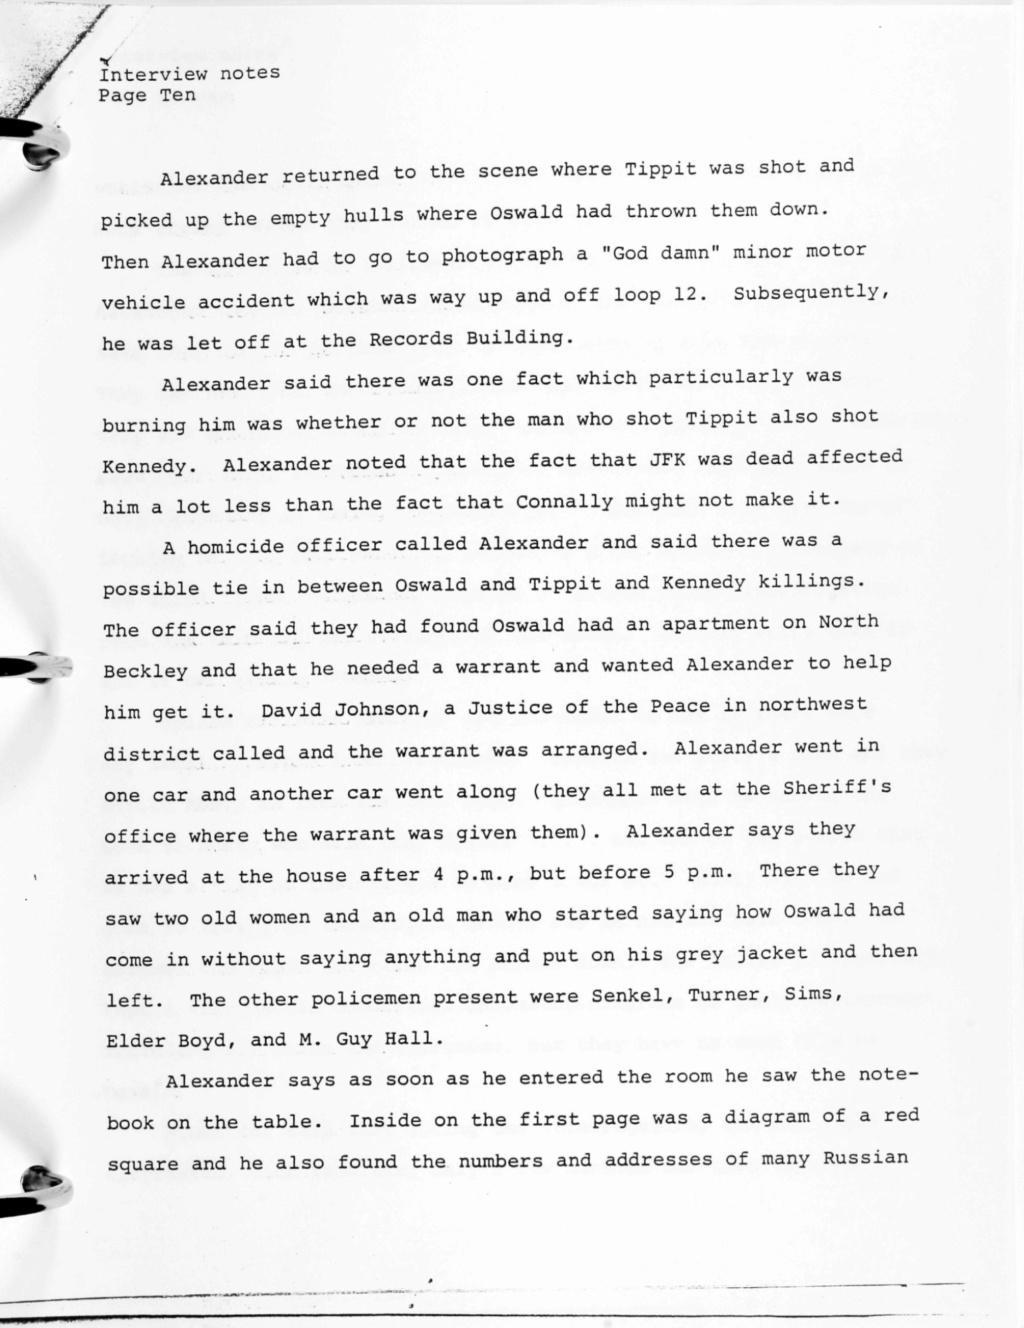 beckley - 	Did Oswald deny living at 1026 N Beckley?  - Page 2 Dallas11